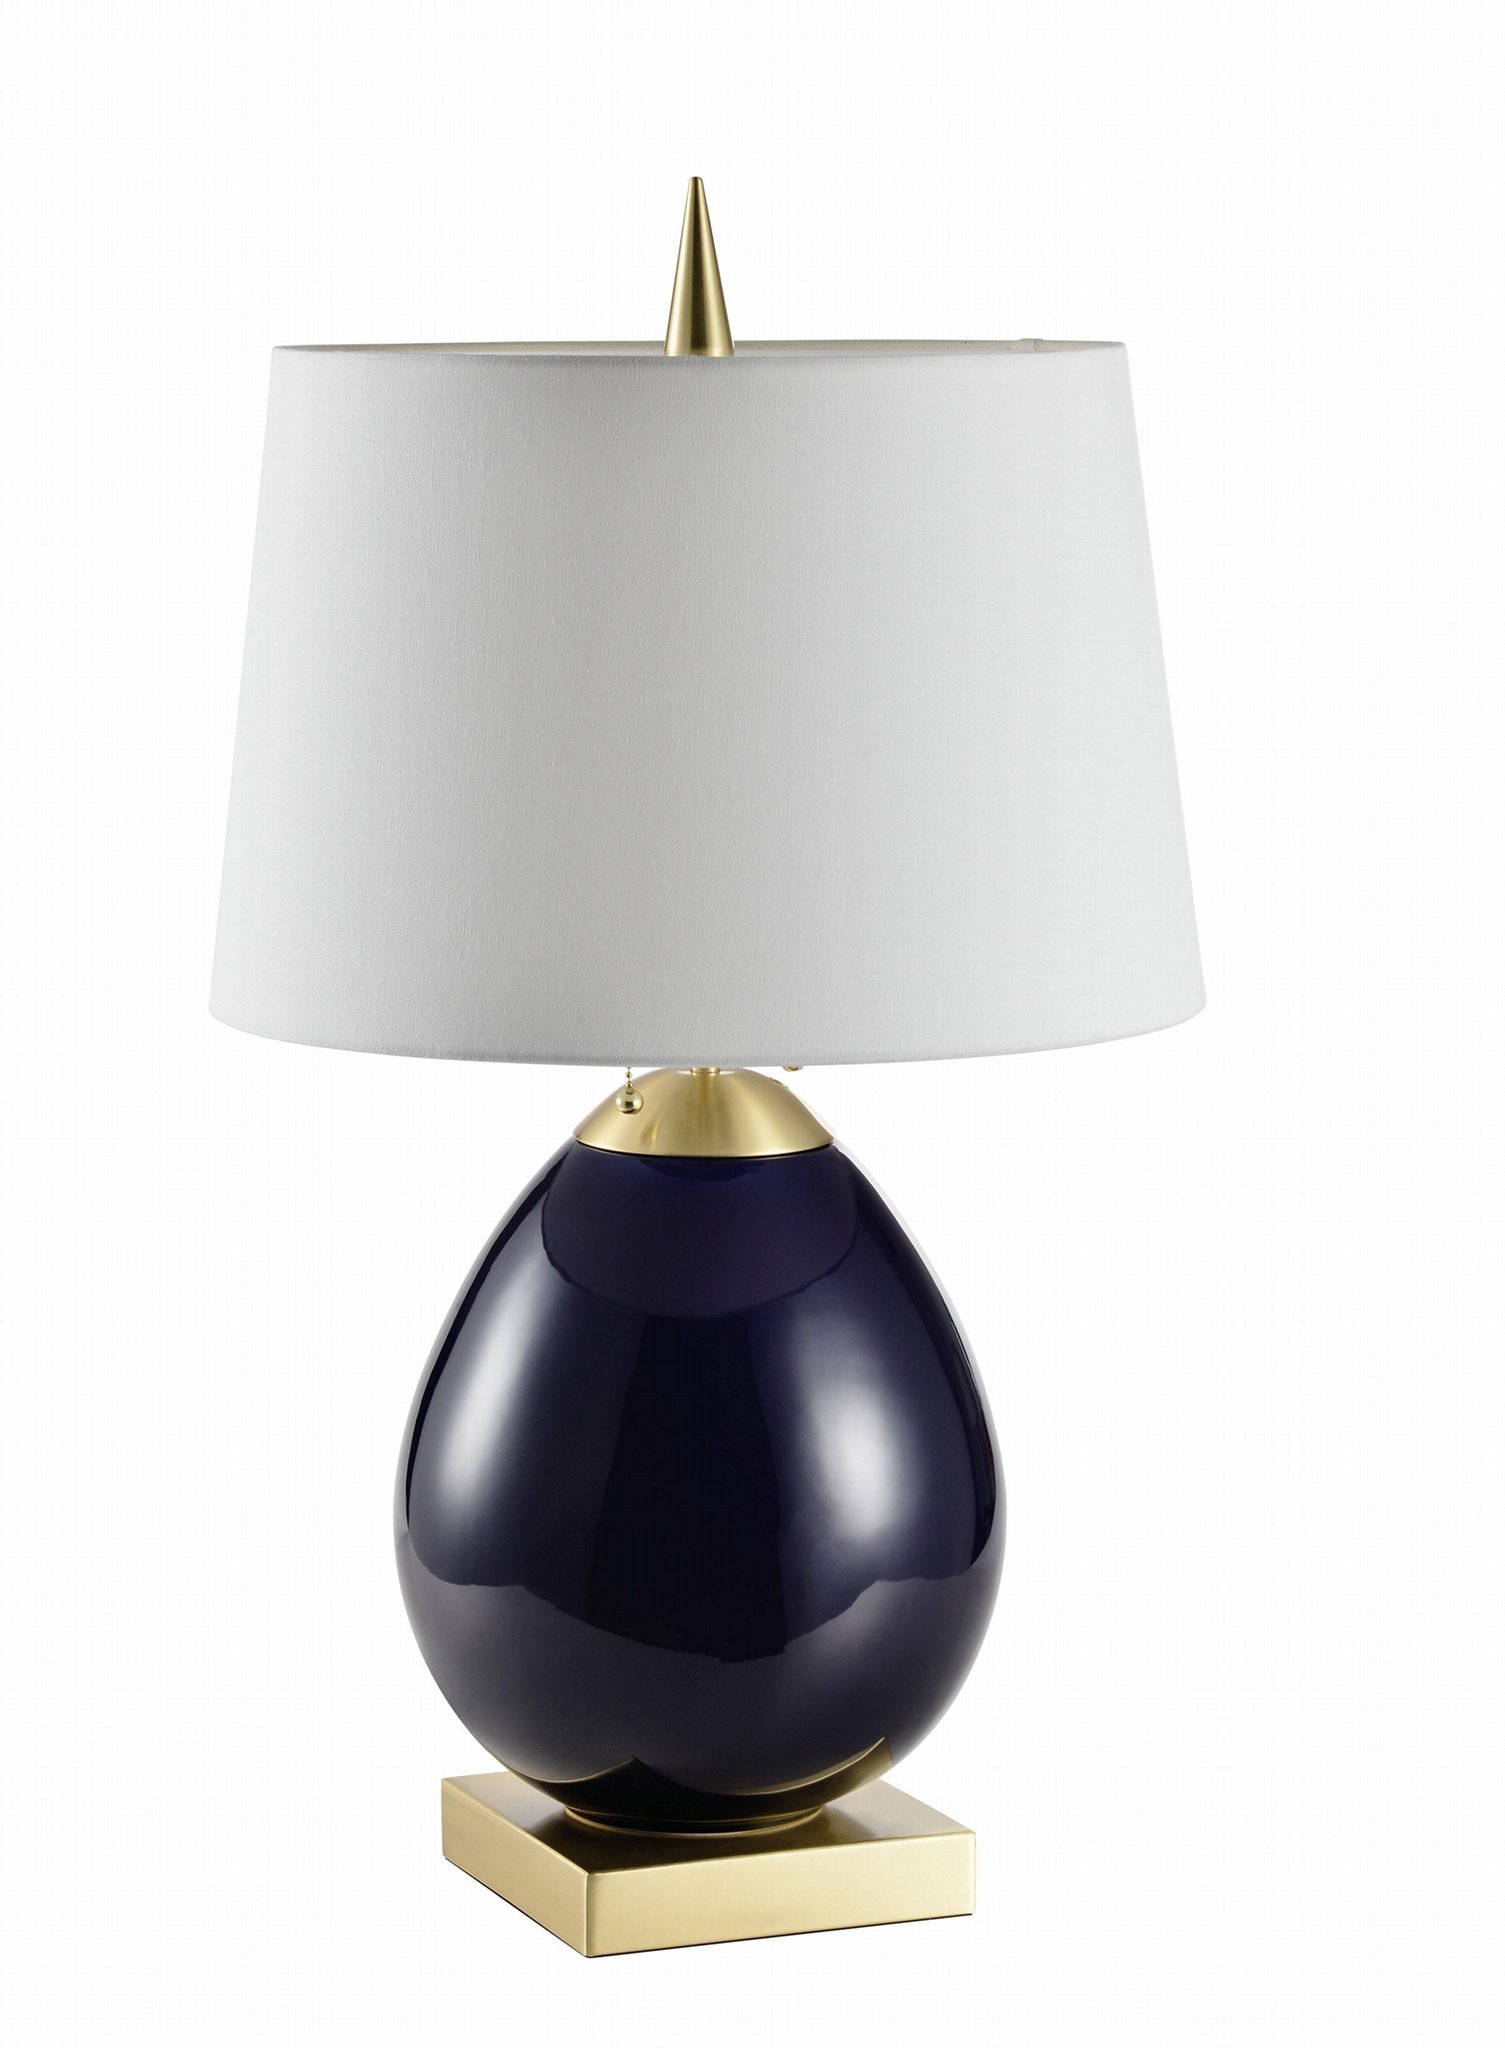 Blue ceramic table lamp - RST8192 - N/A (China Manufacturer) - Interior ...